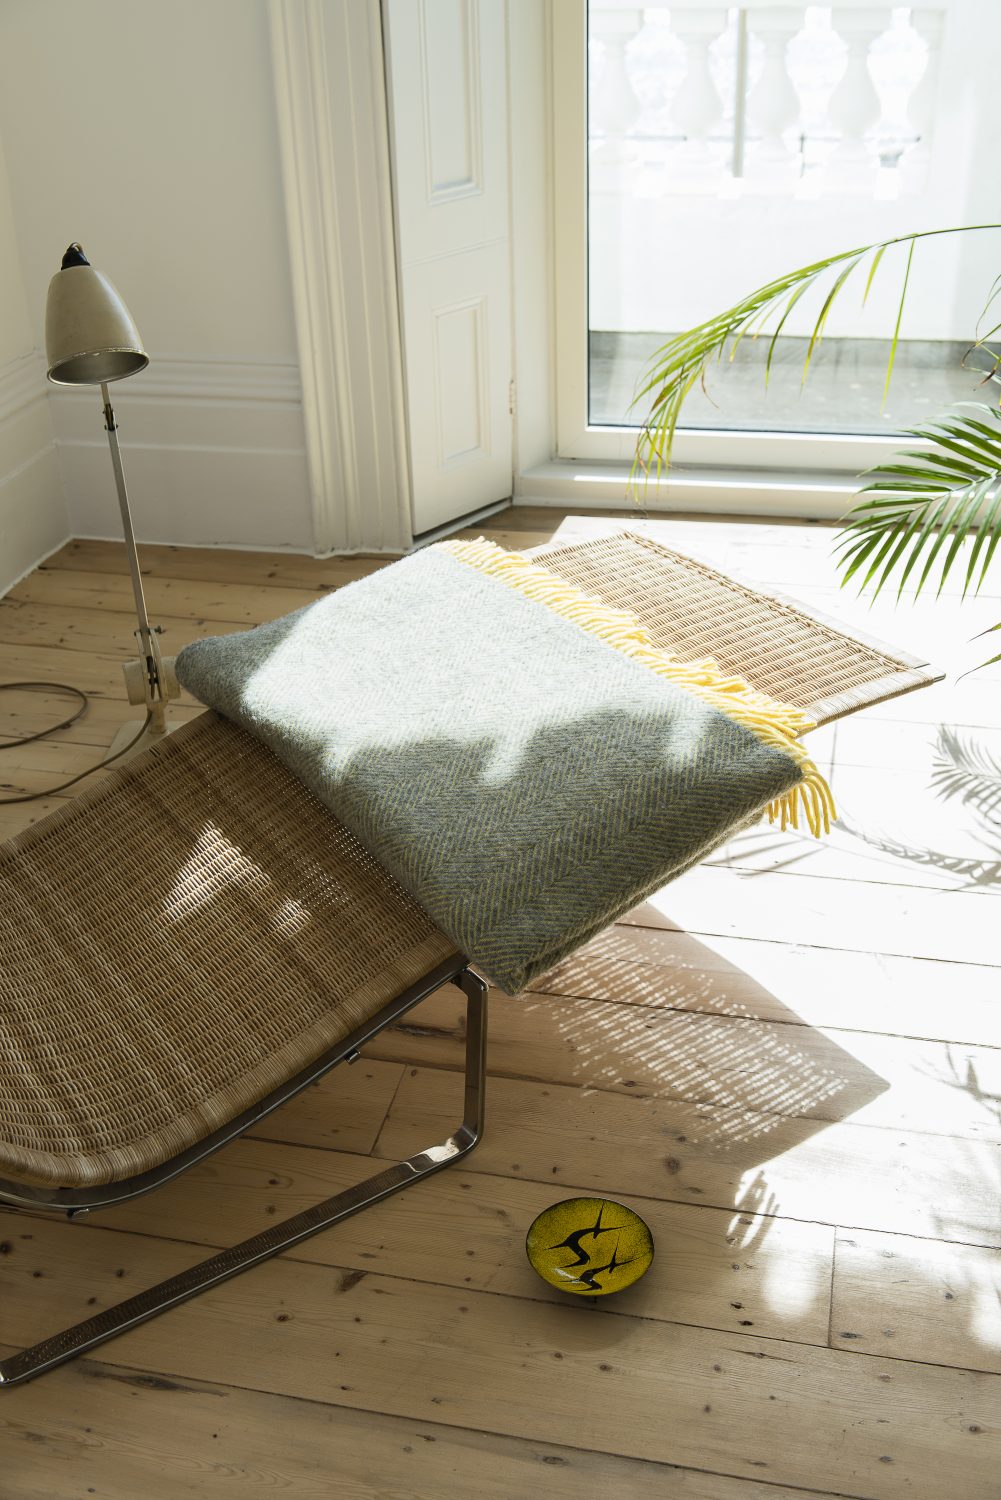 The main living area has floor-length windows with views out to sea. The rattan chaise longue is by Poul Kjaerholm